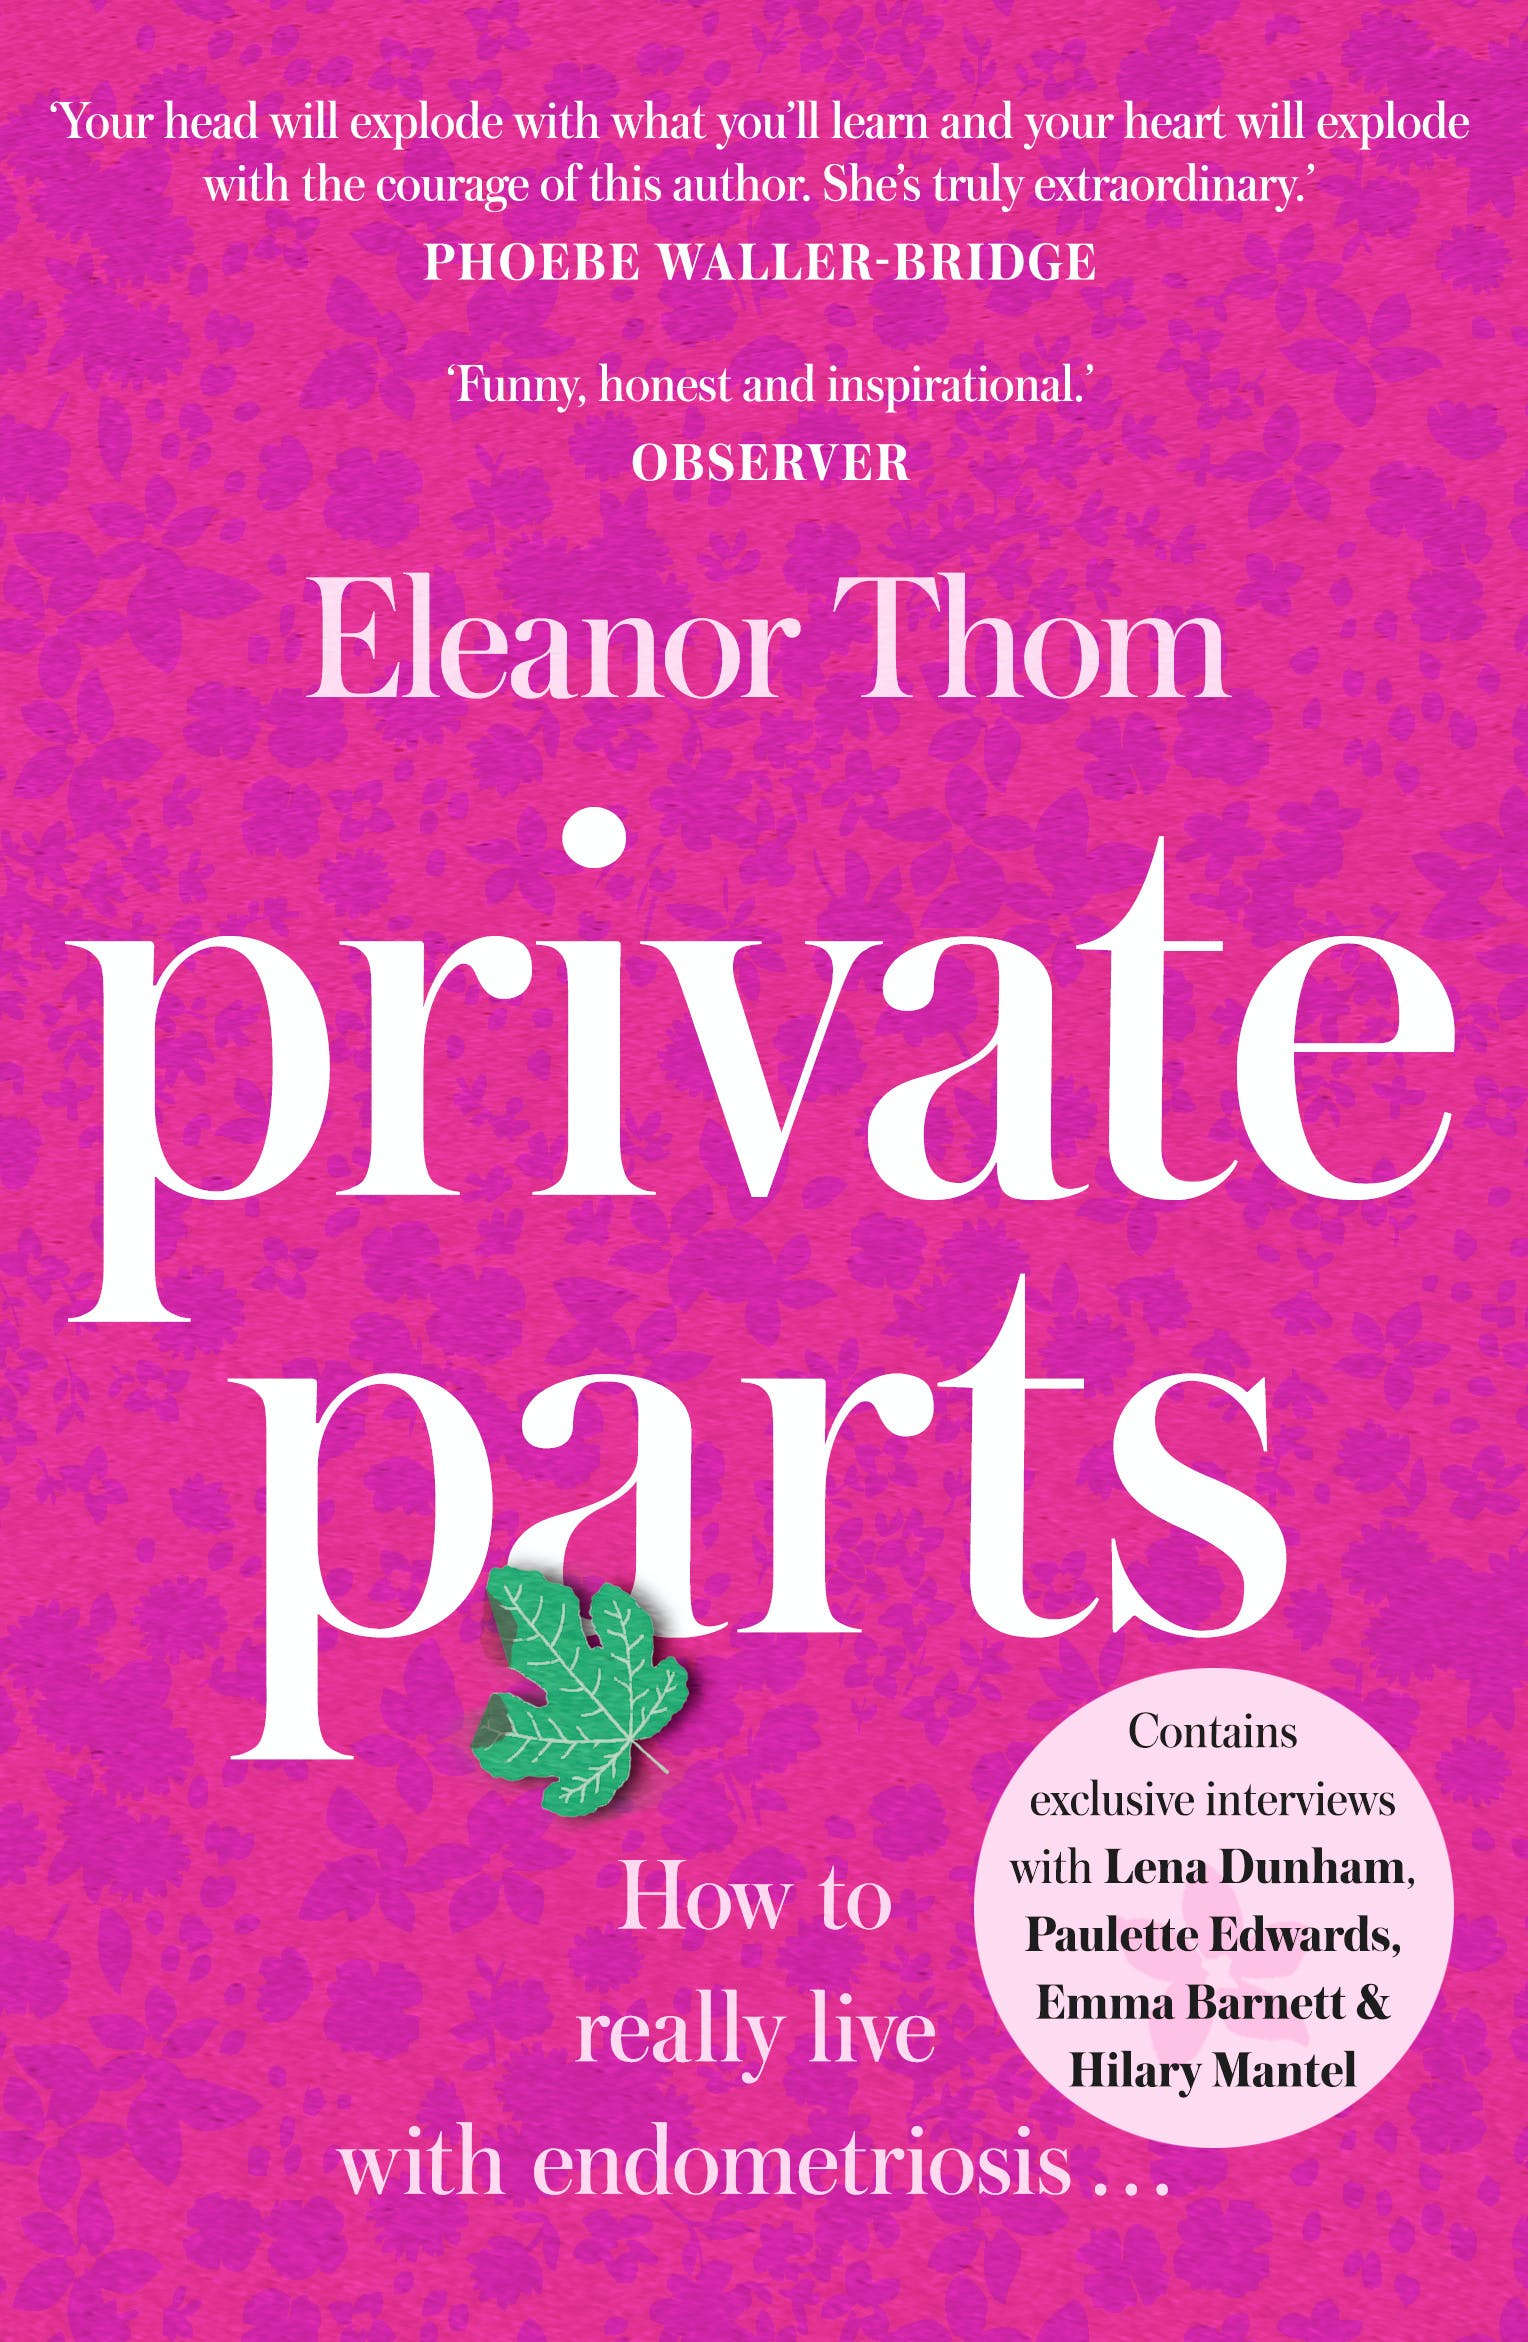 Private Parts : How to Really Live with Endometriosis [Paperback] หนังสือภาษาอังกฤษพร้อมส่ง